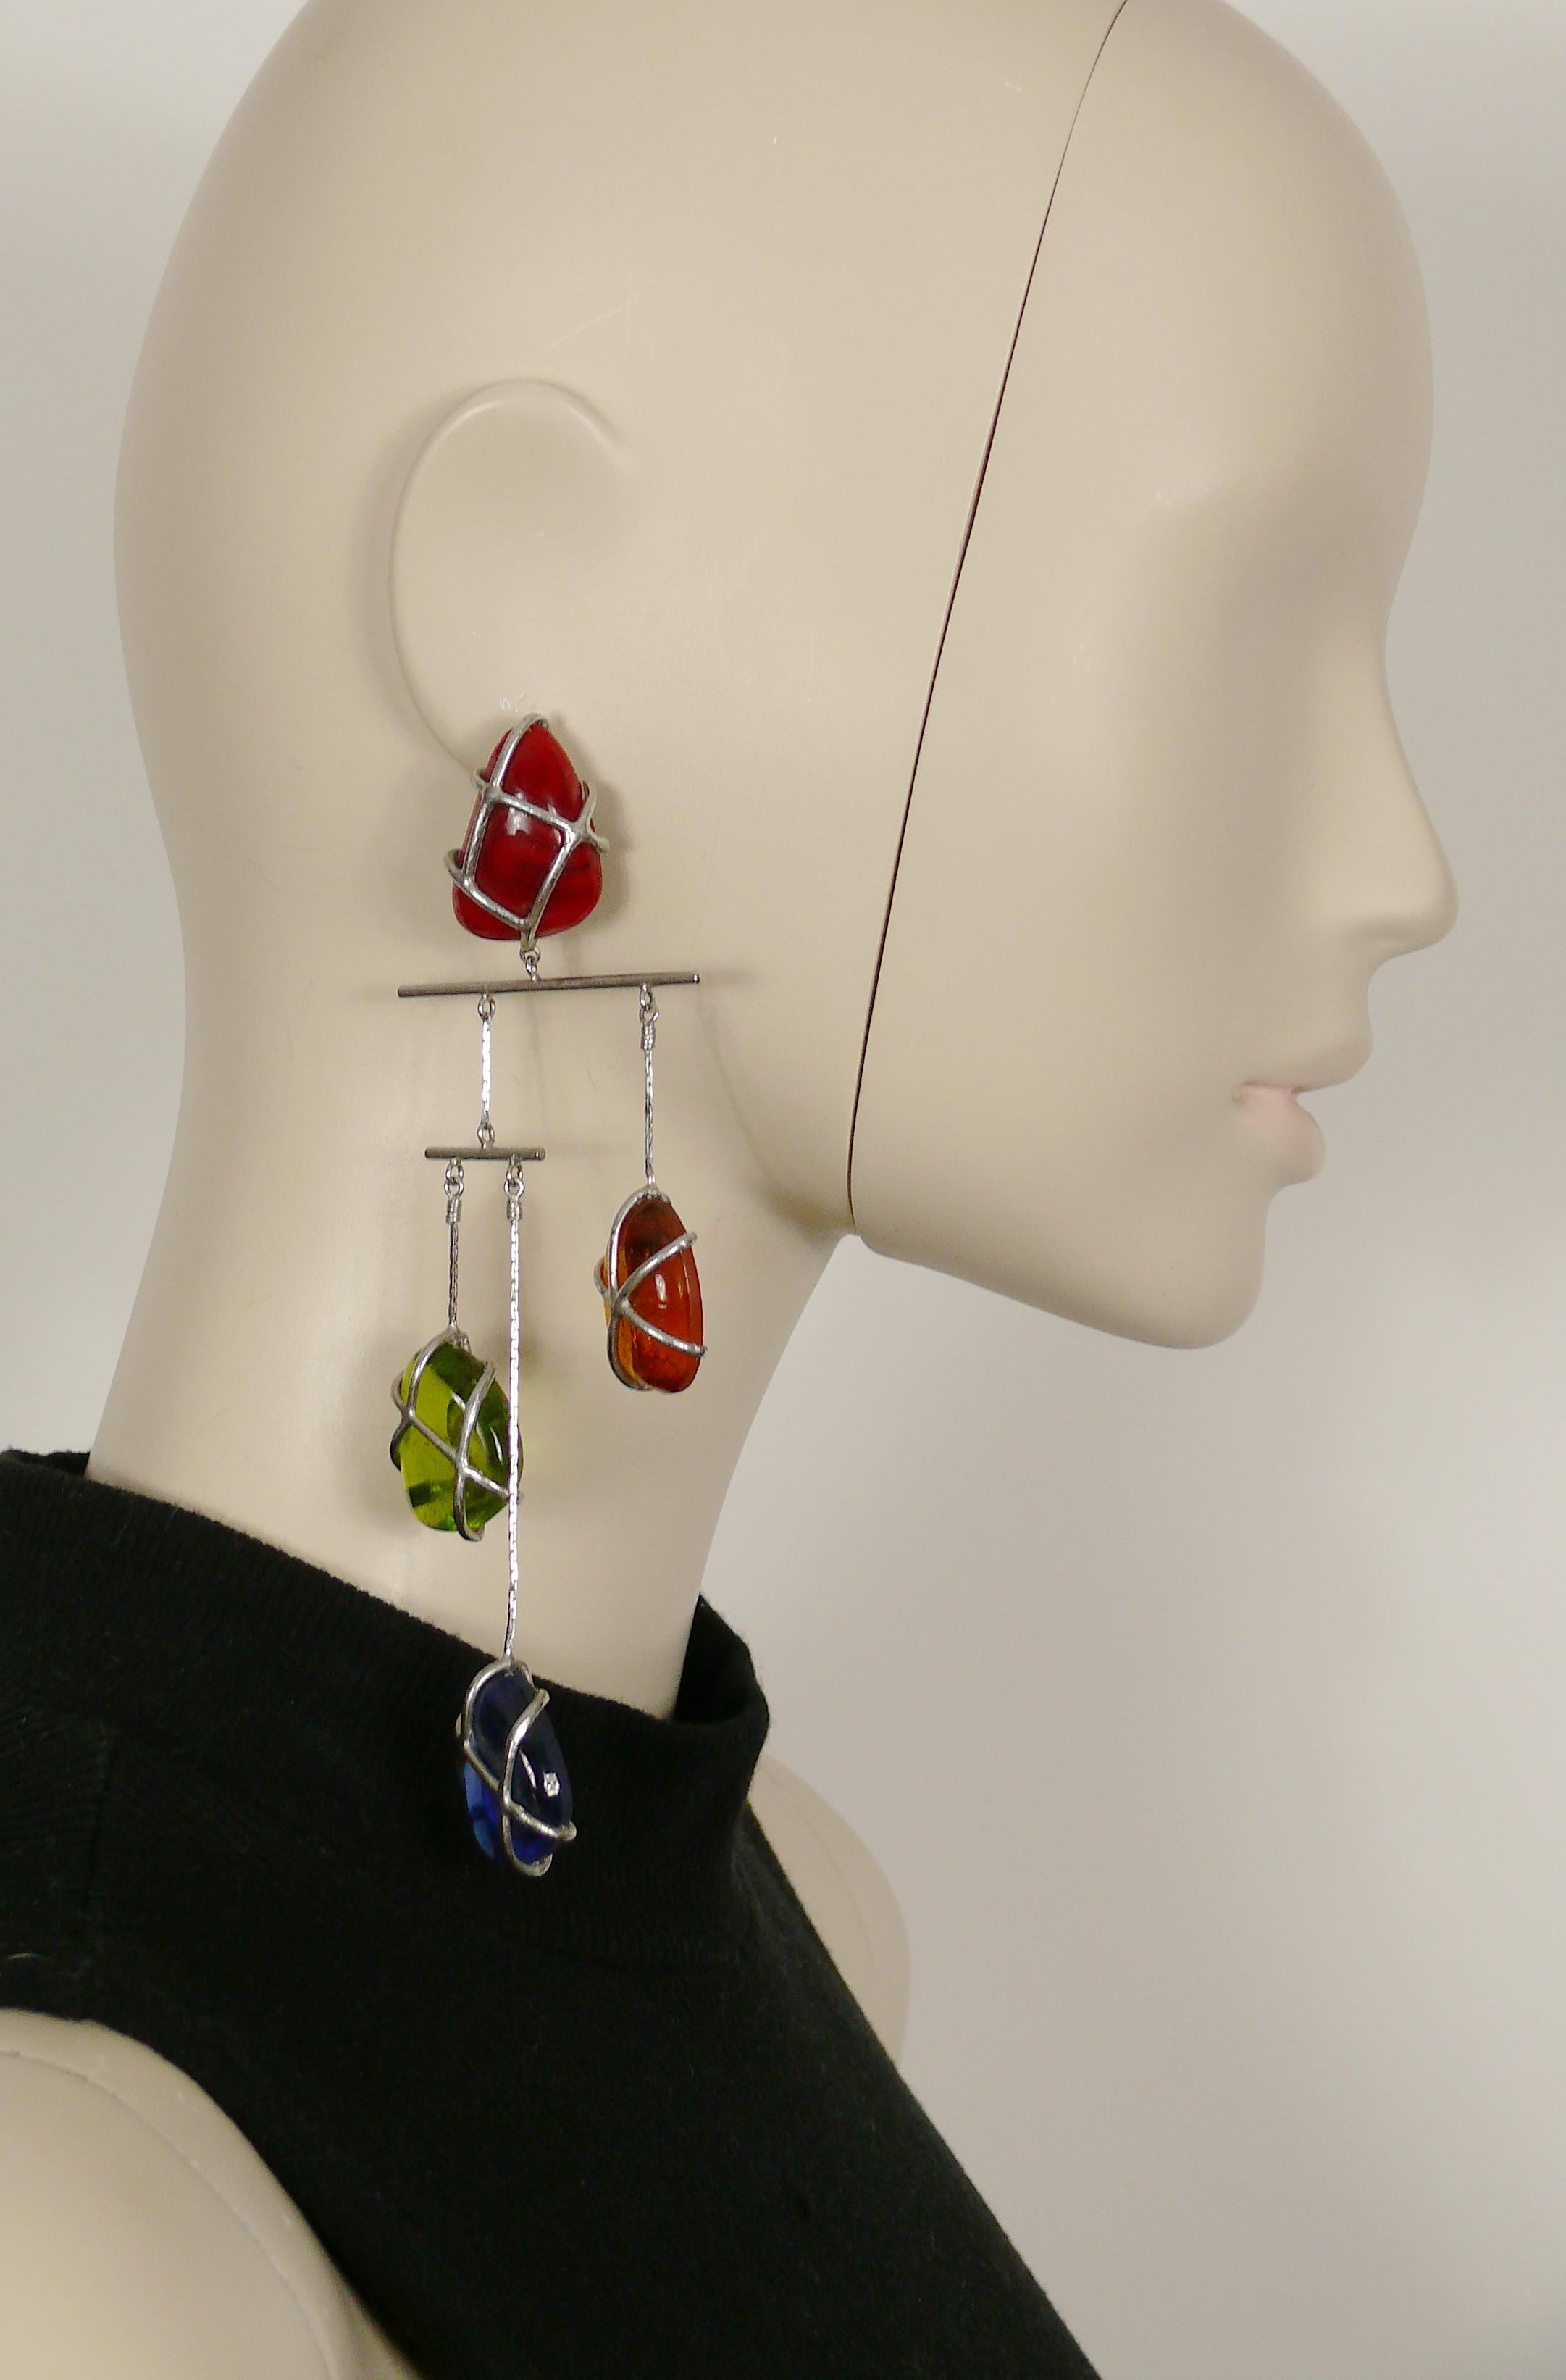 JEAN PAUL GAULTIER vintage rare massive silver toned mobile kinetic dangling earrings (clip-on) featuring encaged multicolored glass cabochons.

Silver tone metal hardware.

Marked GAULTIER.

Indicative measurements : max. length approx. 15 cm (5.91